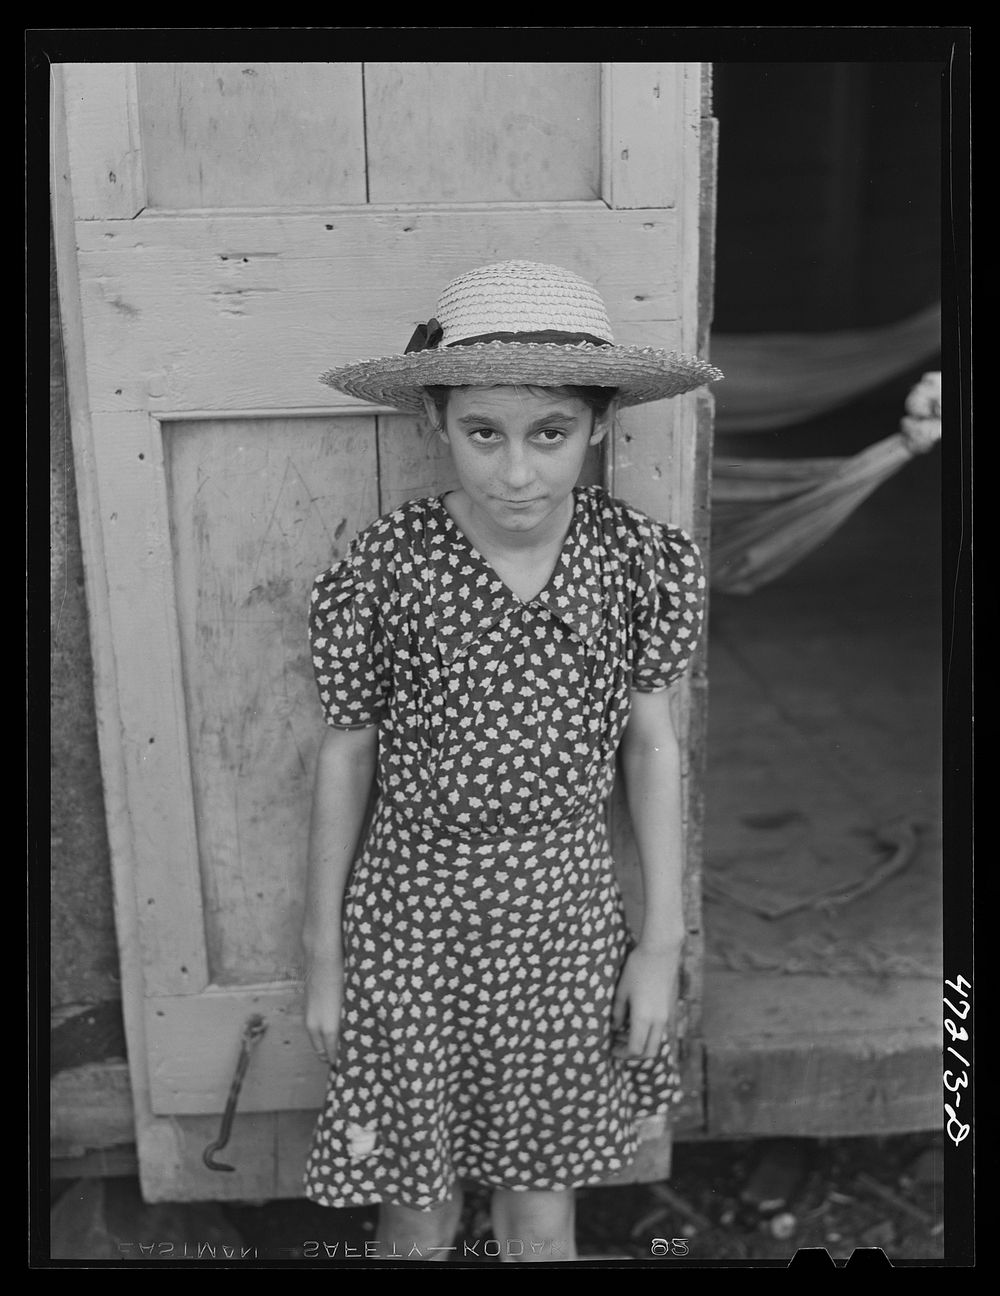 [Untitled photo, possibly related to: French village, a small settlement on Saint Thomas Island, Virgin Islands. Children of…